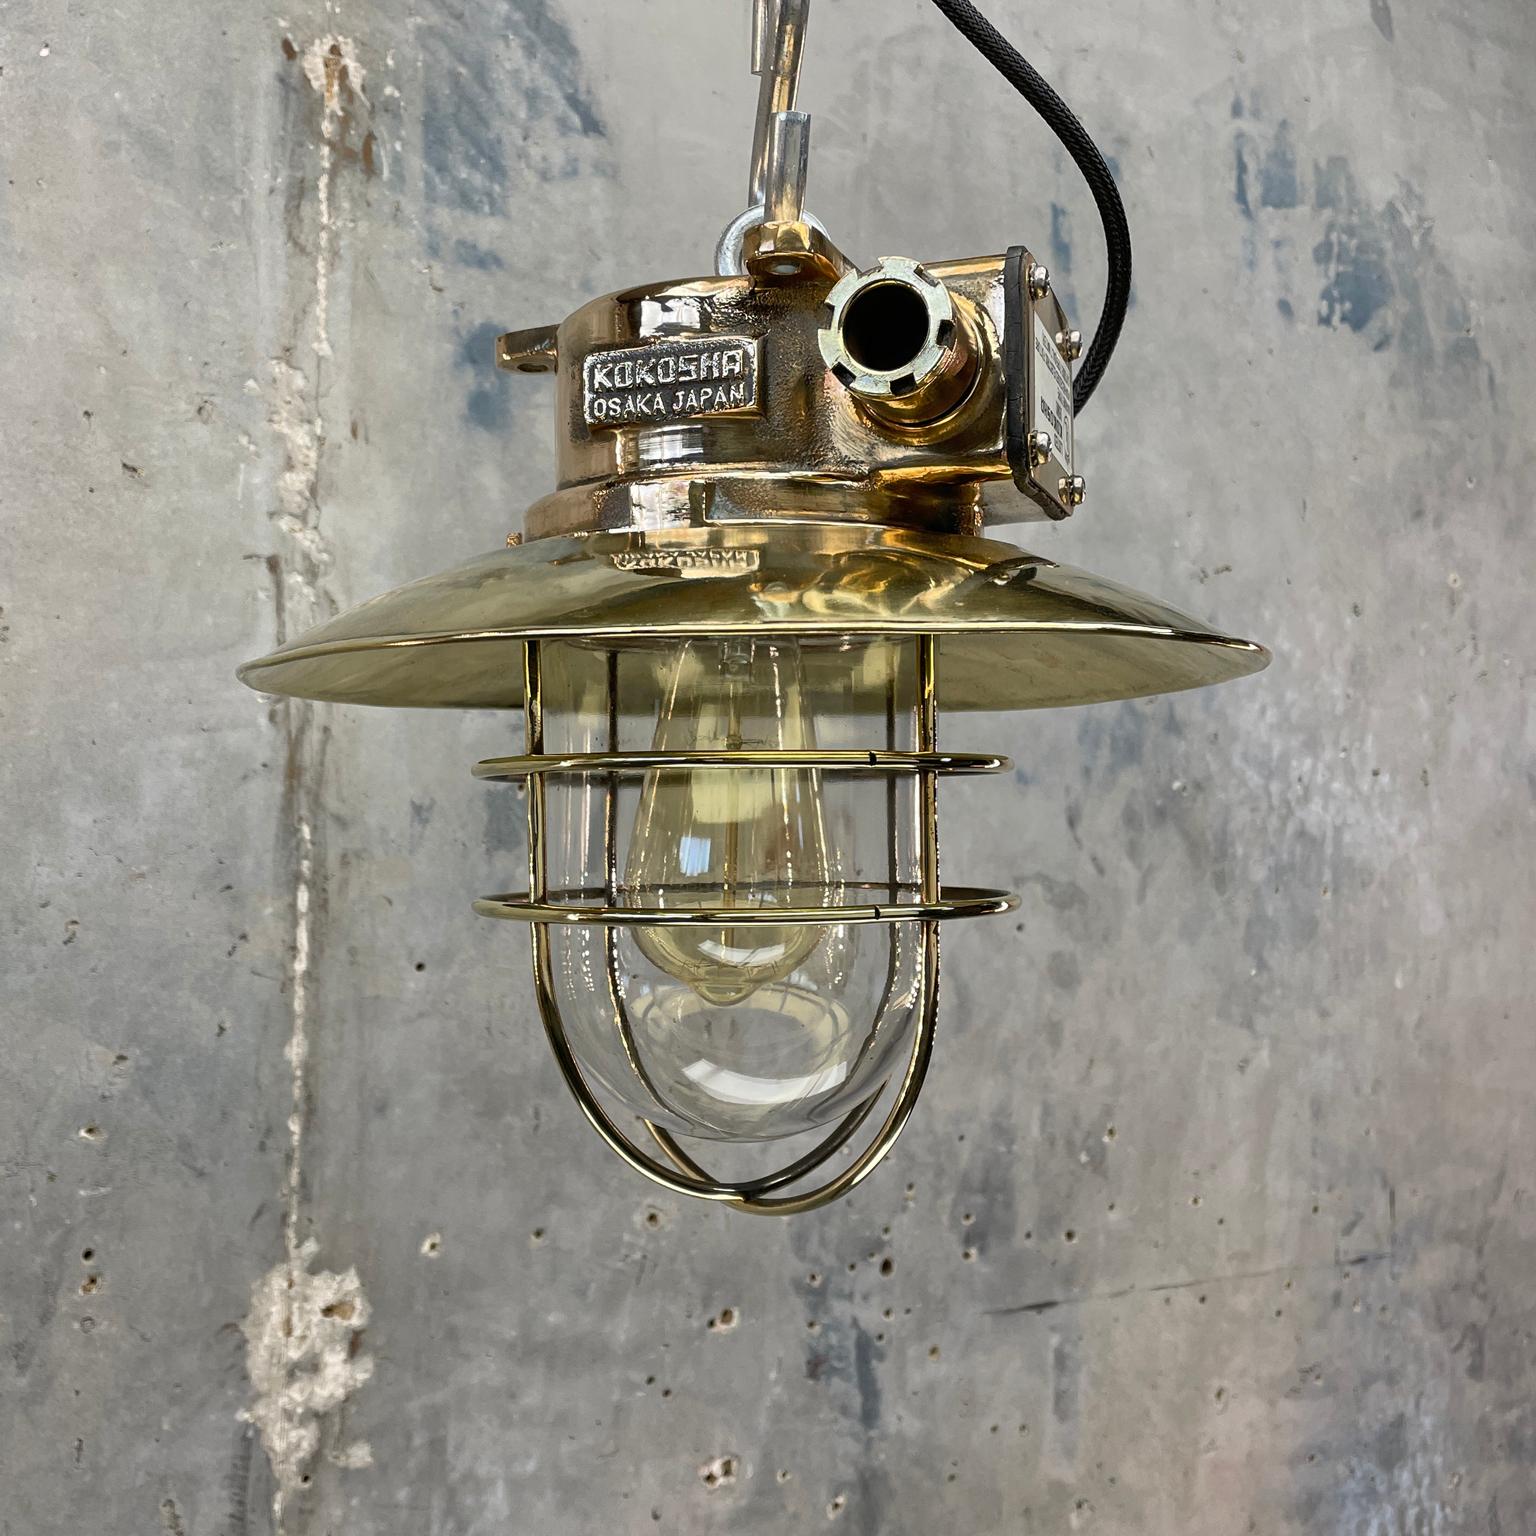 Cast 1980s Japanese Bronze Industrial Ceiling Light Brass Shade & Glass Dome U/L